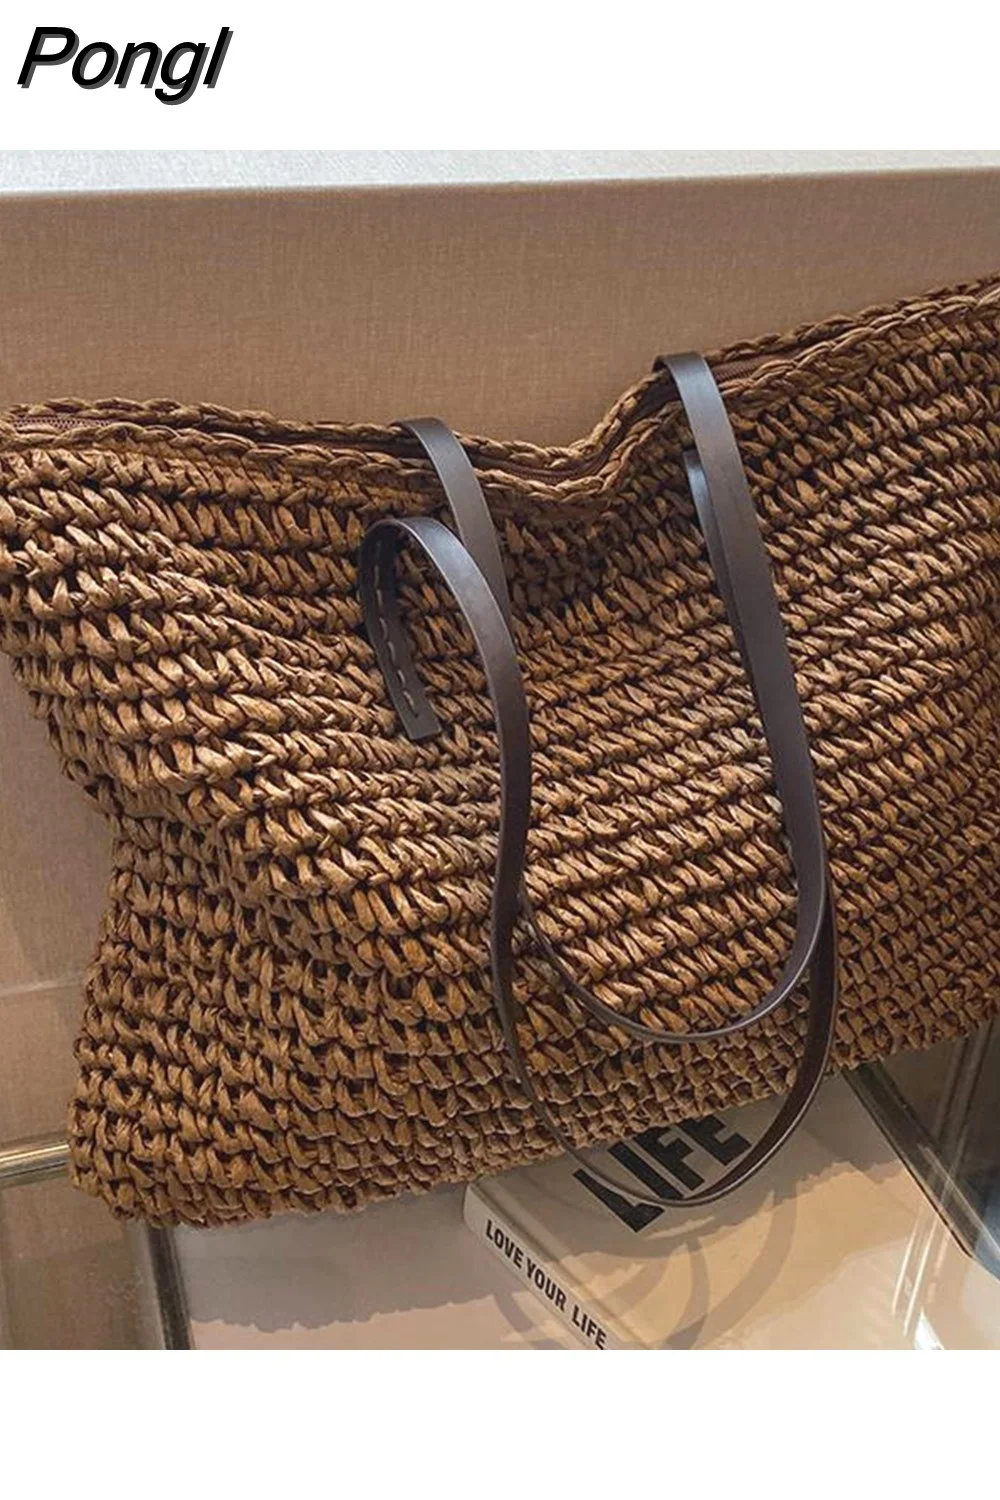 Pongl Design Straw Woven Tote Bags Summer Casual Large Capacity Handbags New Fashion Beach Women Shoulder Simple Style Shopping